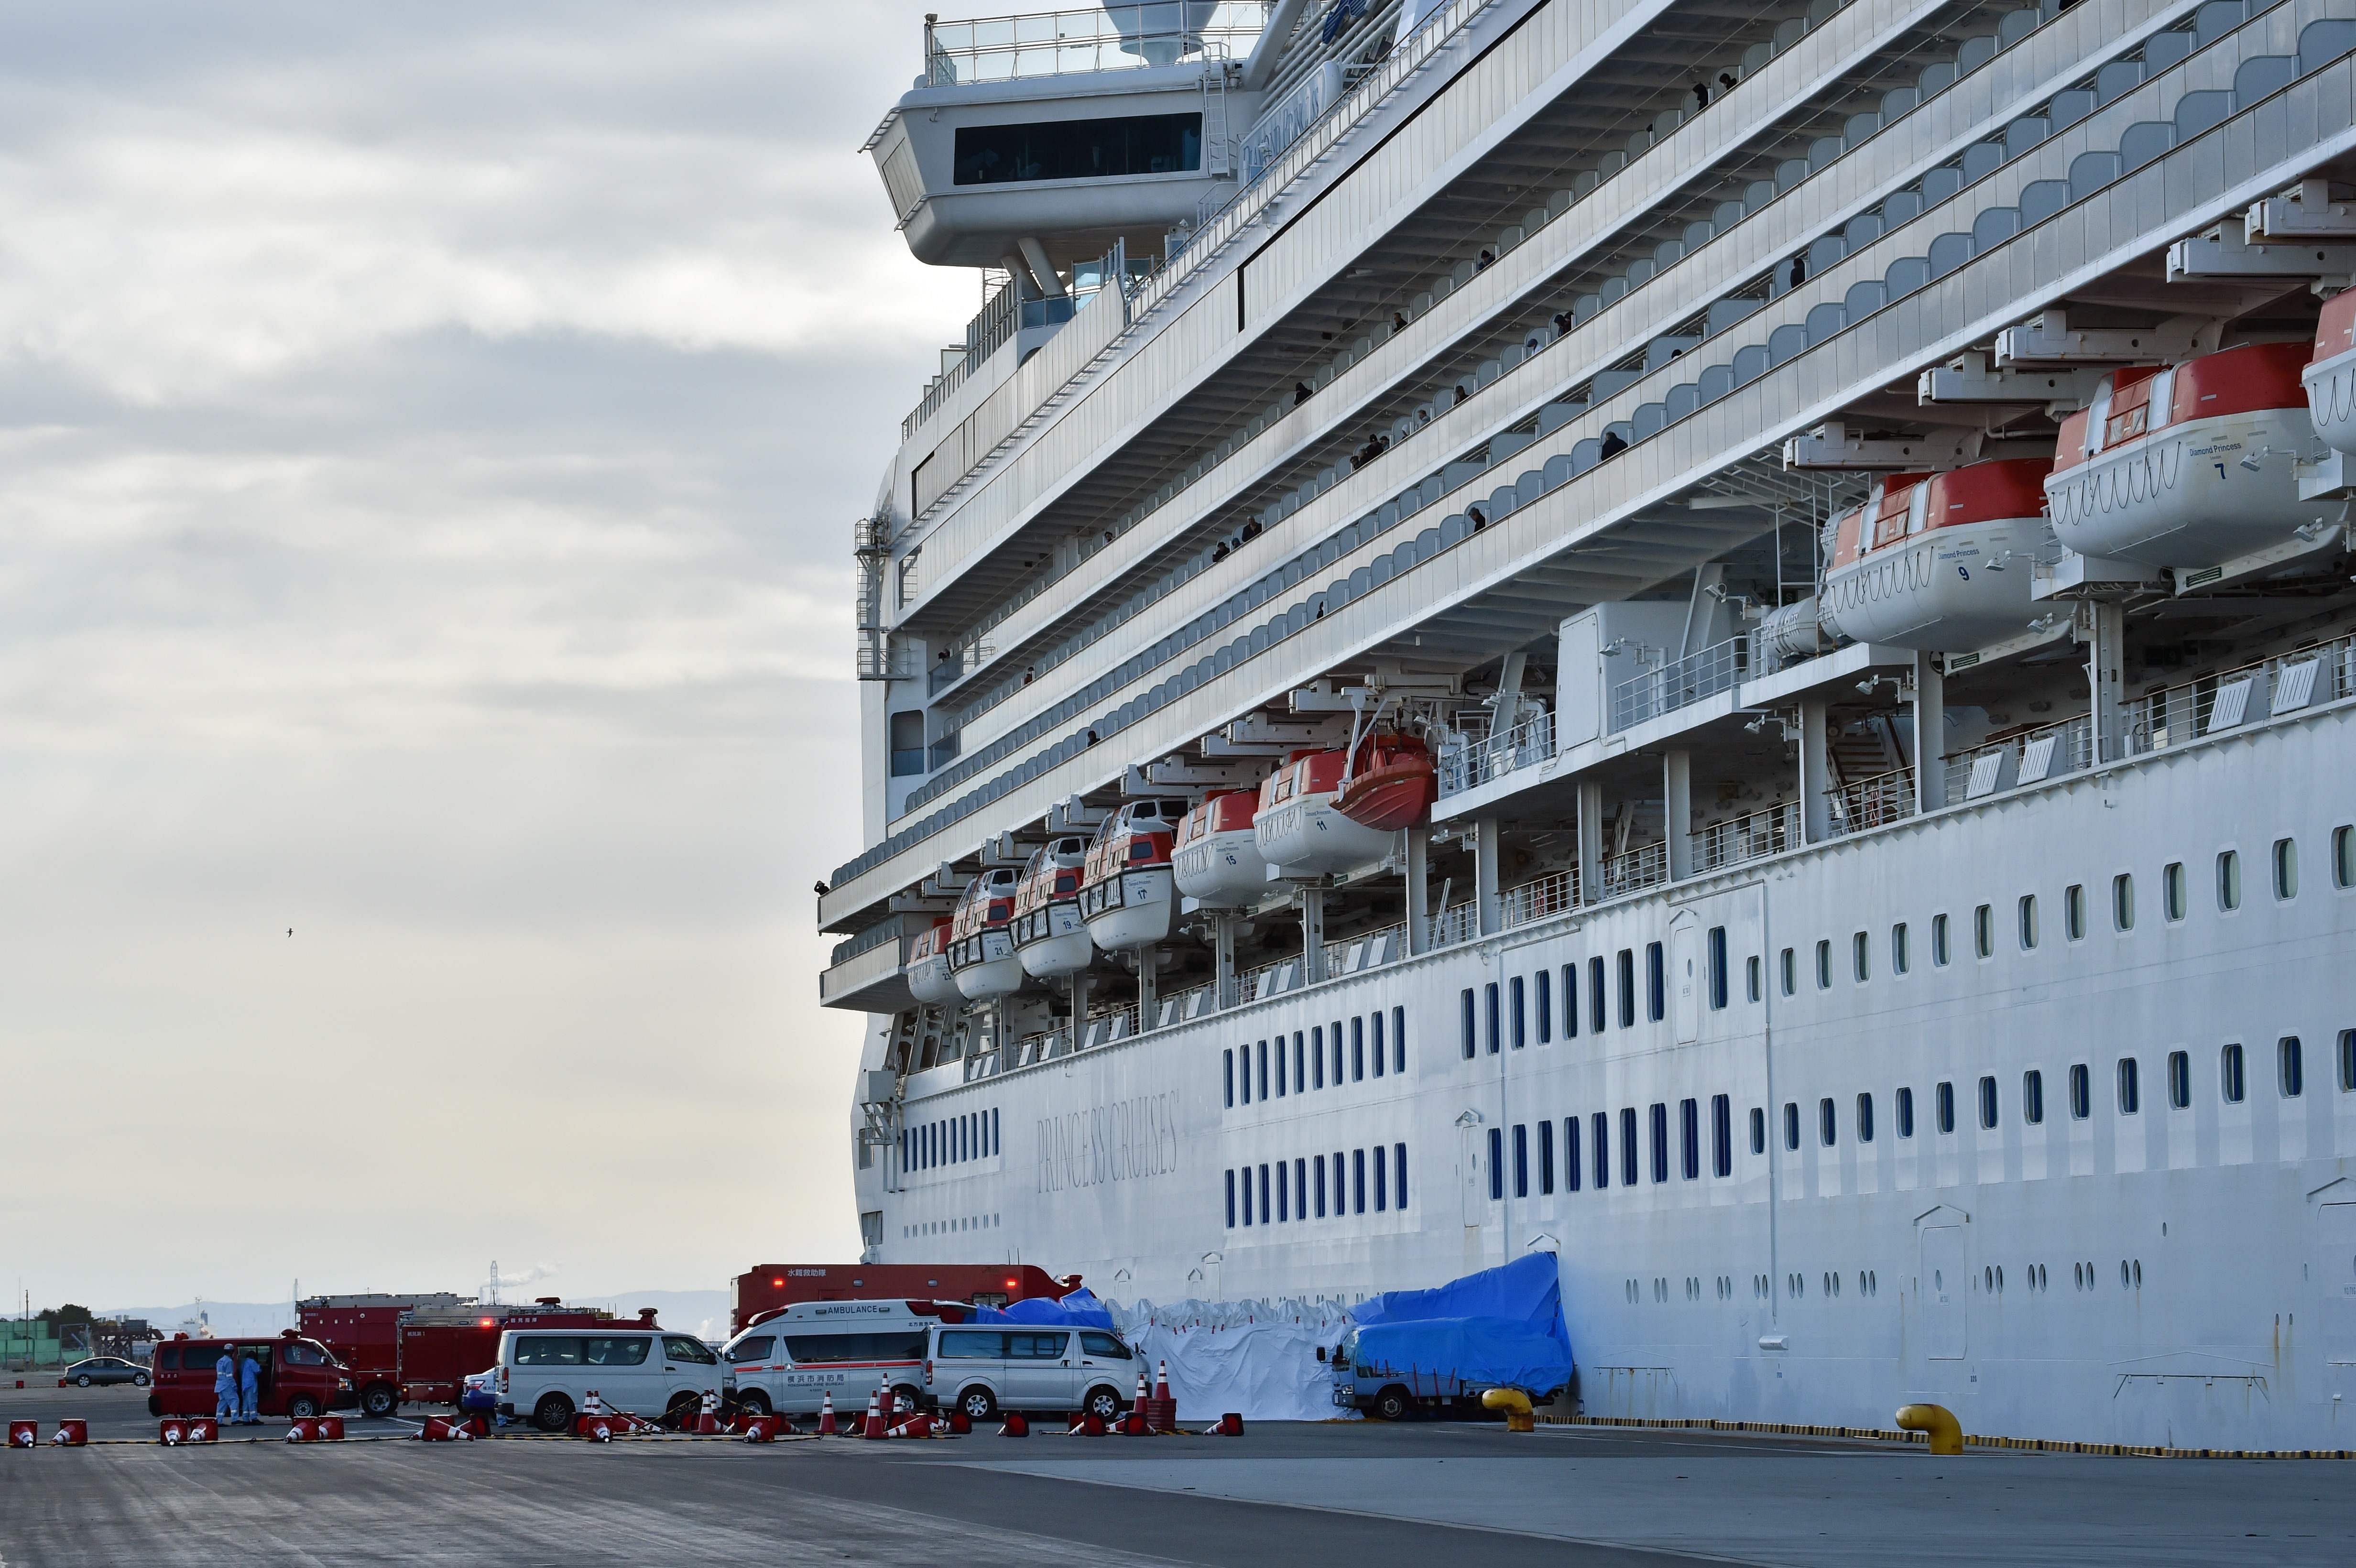 An ambulance (L) waits for patients who tested positive for the new coronavirus from the Diamond Princess cruise ship (R) at the Daikoku Pier Cruise Terminal in Yokohama. (AFP Photo)